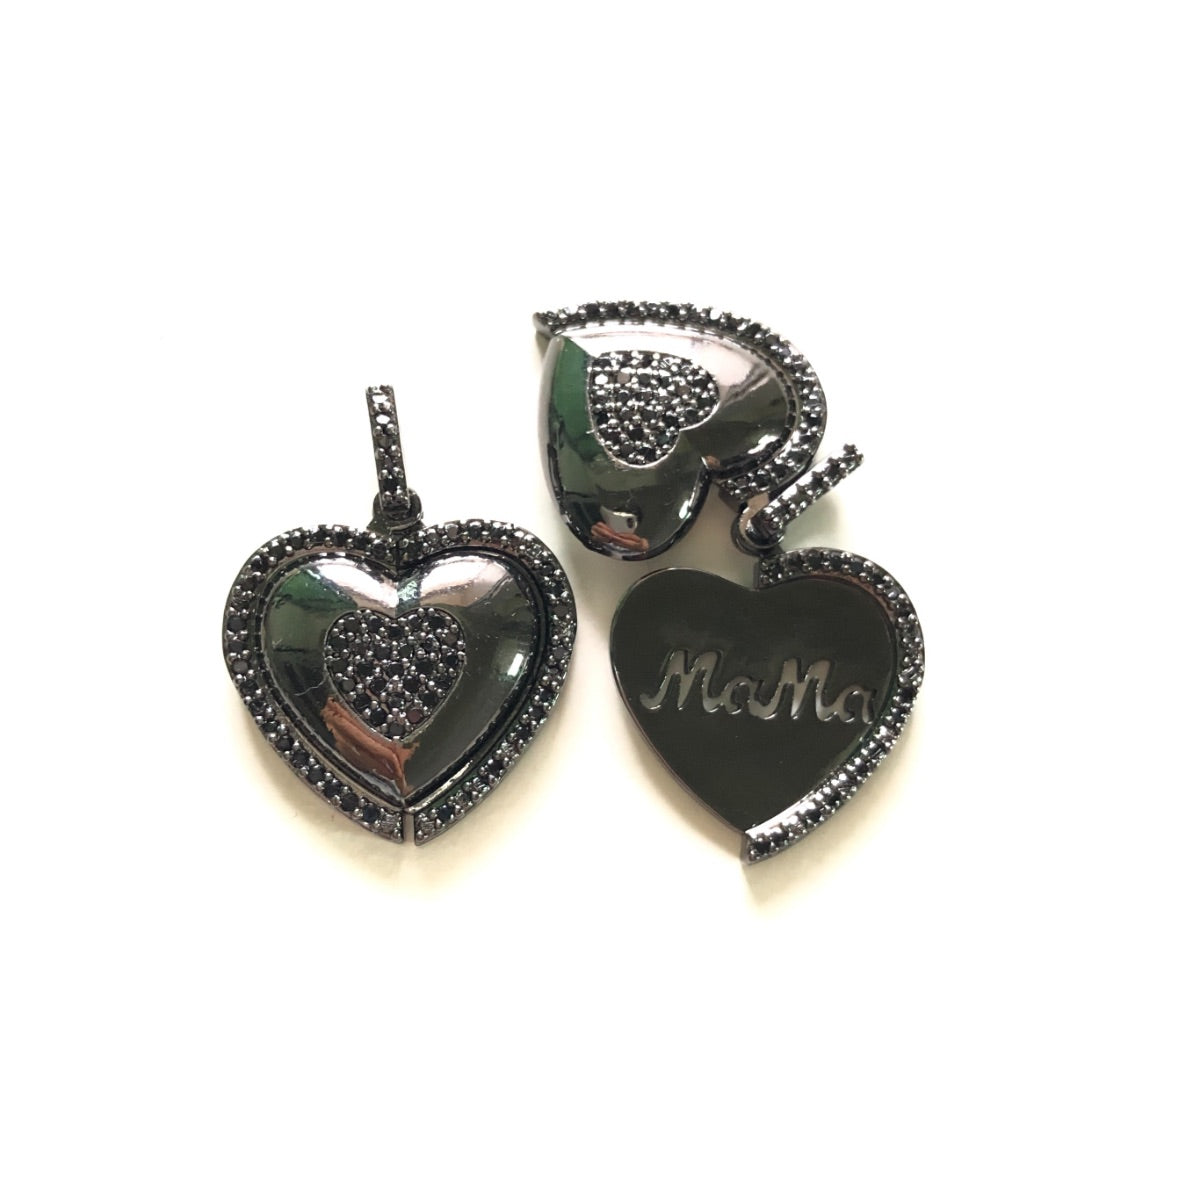 10pcs/lot 27*22mm CZ Paved Mom in Heart 3D Charms Black on Black CZ Paved Charms Mother's Day On Sale Charms Beads Beyond